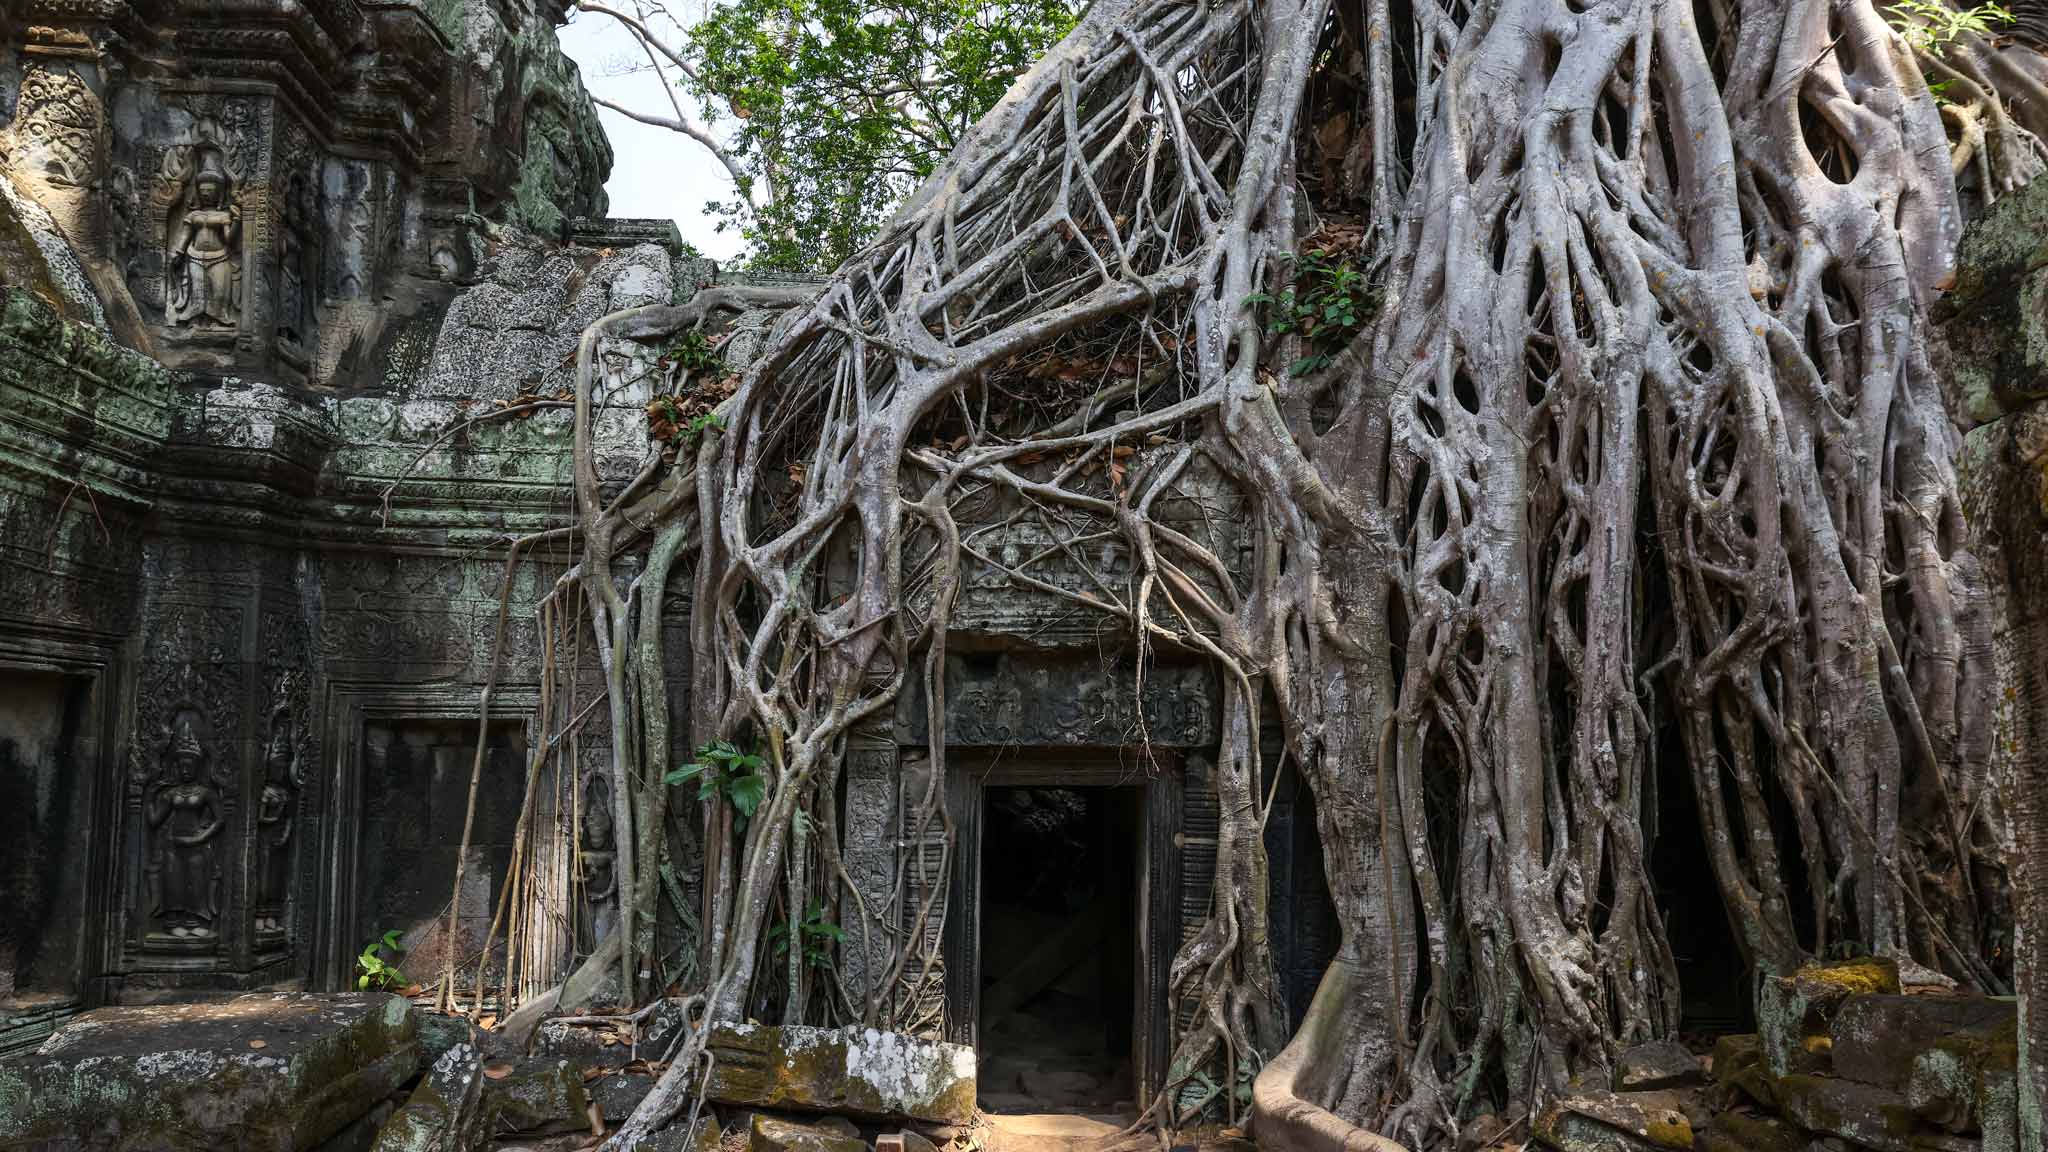 Ancient tree roots intertwining with the ruins of Ta Prohm temple in Siem Reap.